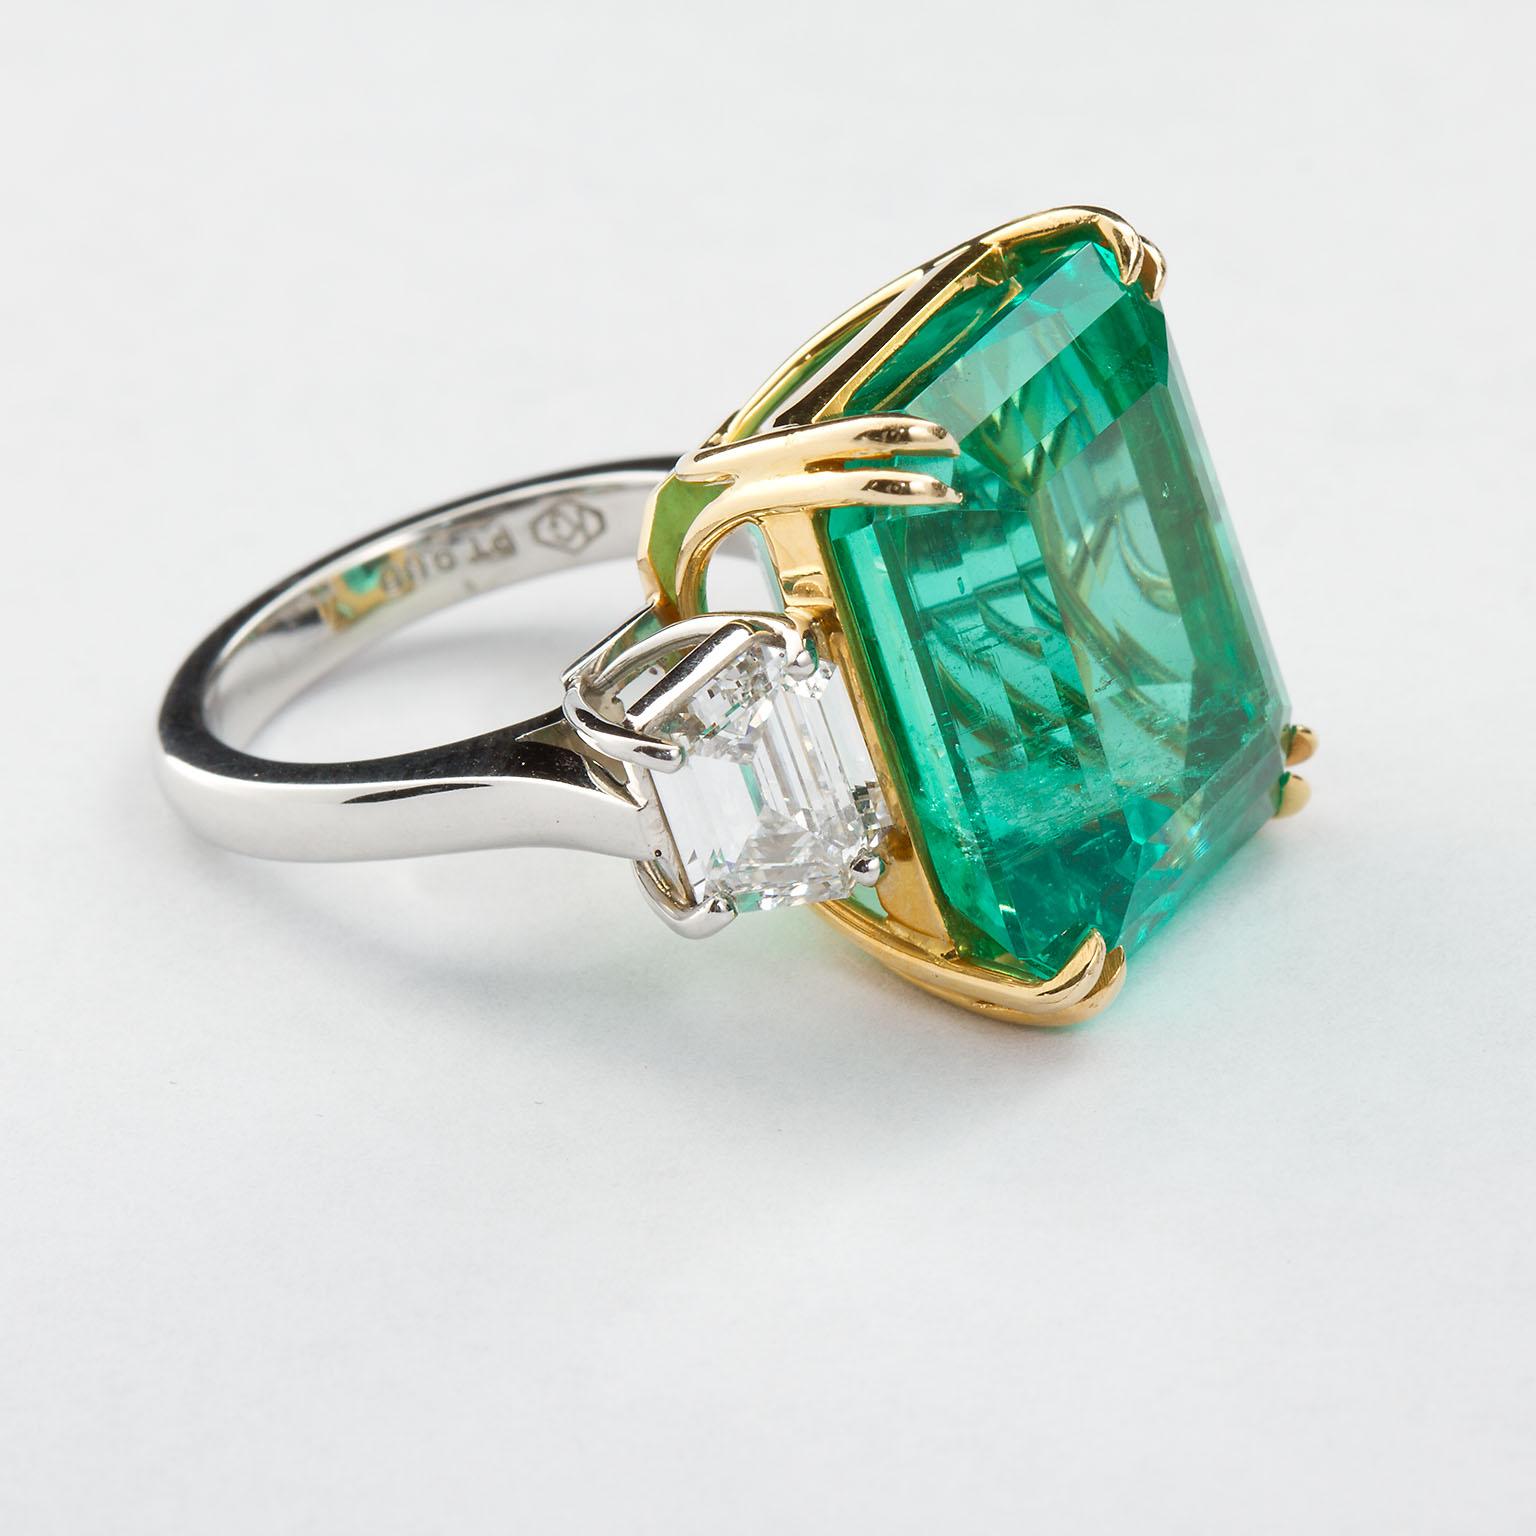 A remarkable fine Colombian emerald set in an 18k and platinum two diamond side-stone ring. The 22.54 carat emerald shows very good color being deep green and highly transparent. Slight threading towards the bottom and side of the table. Set between